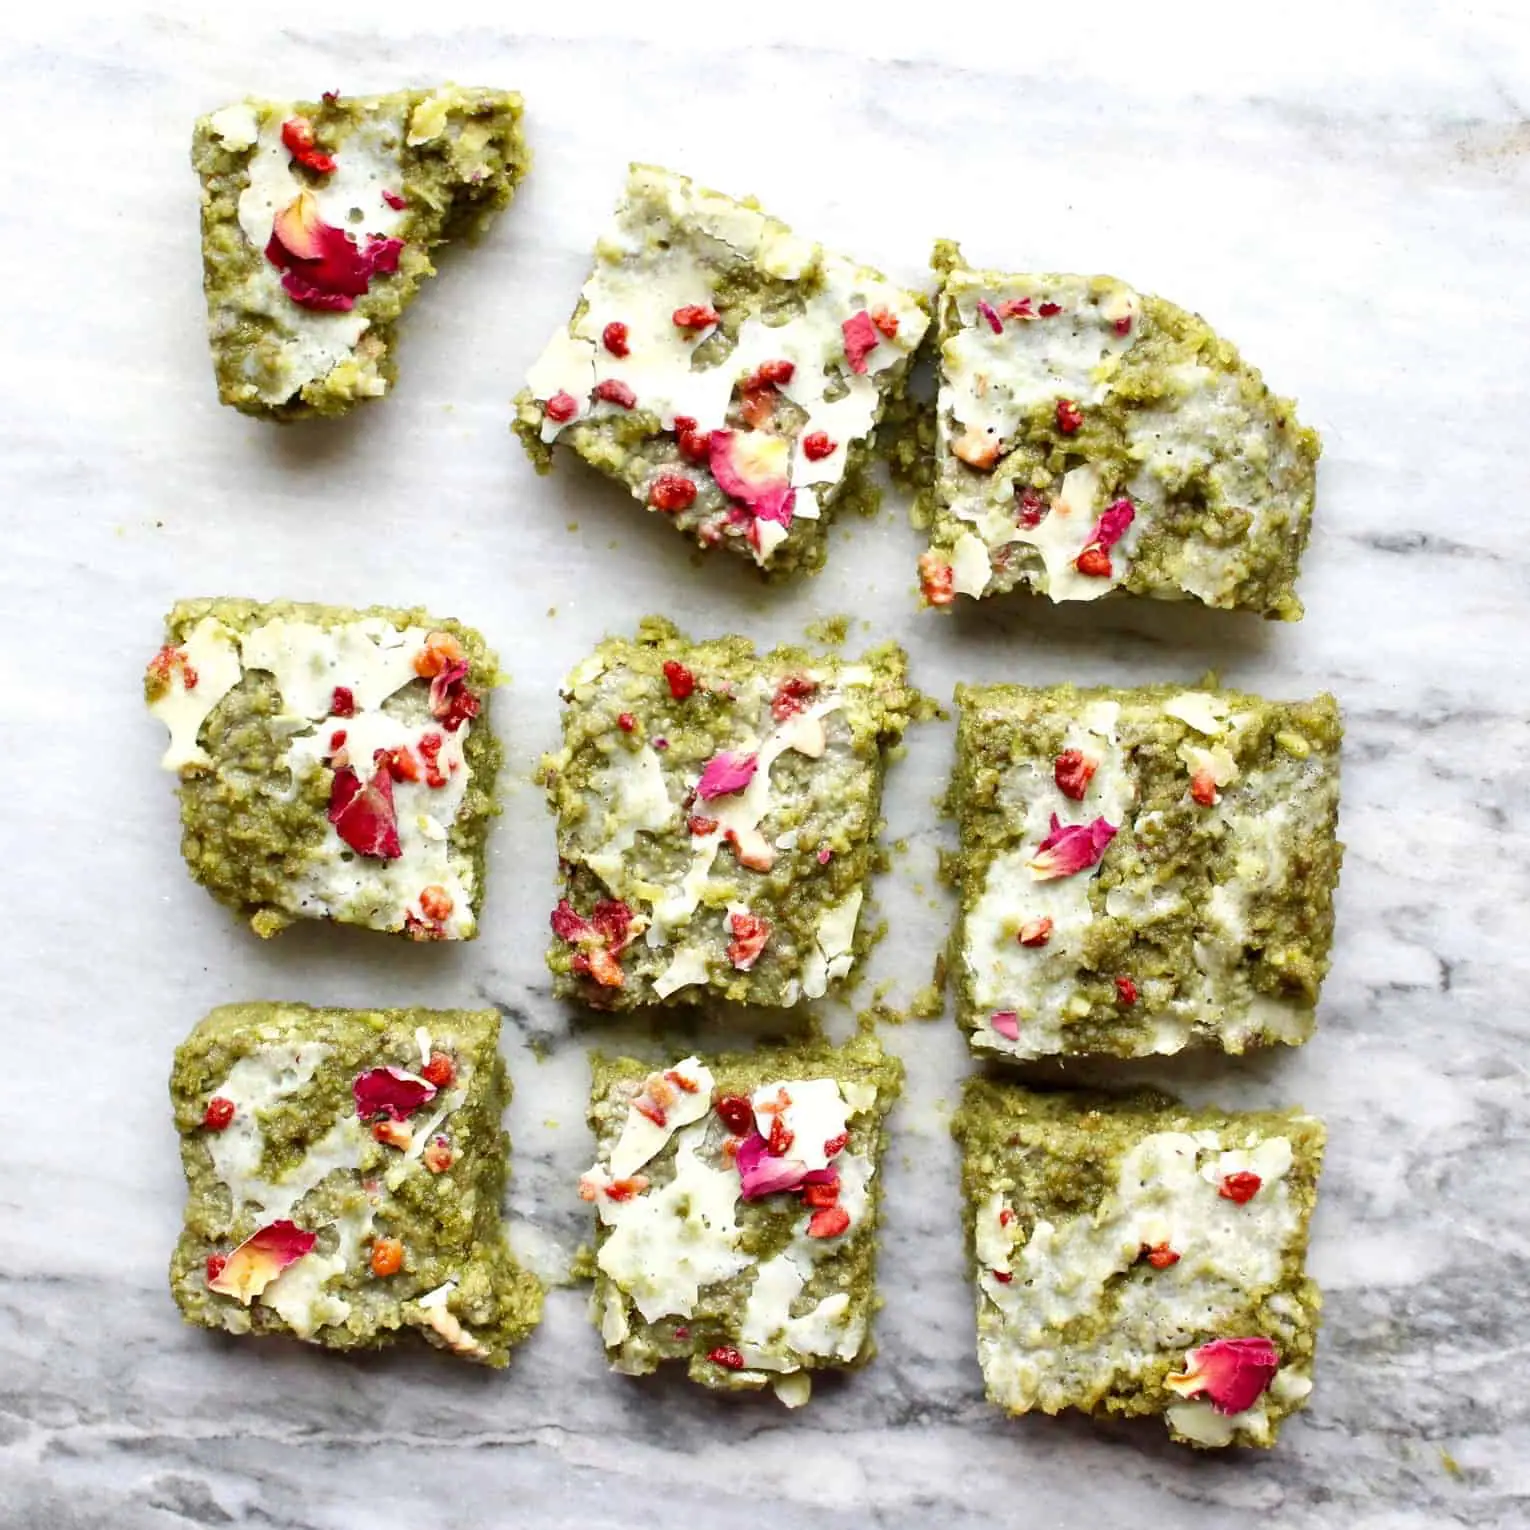 Photo of nine green brownies drizzled with white chocolate and decorated with rose petals on a marble background